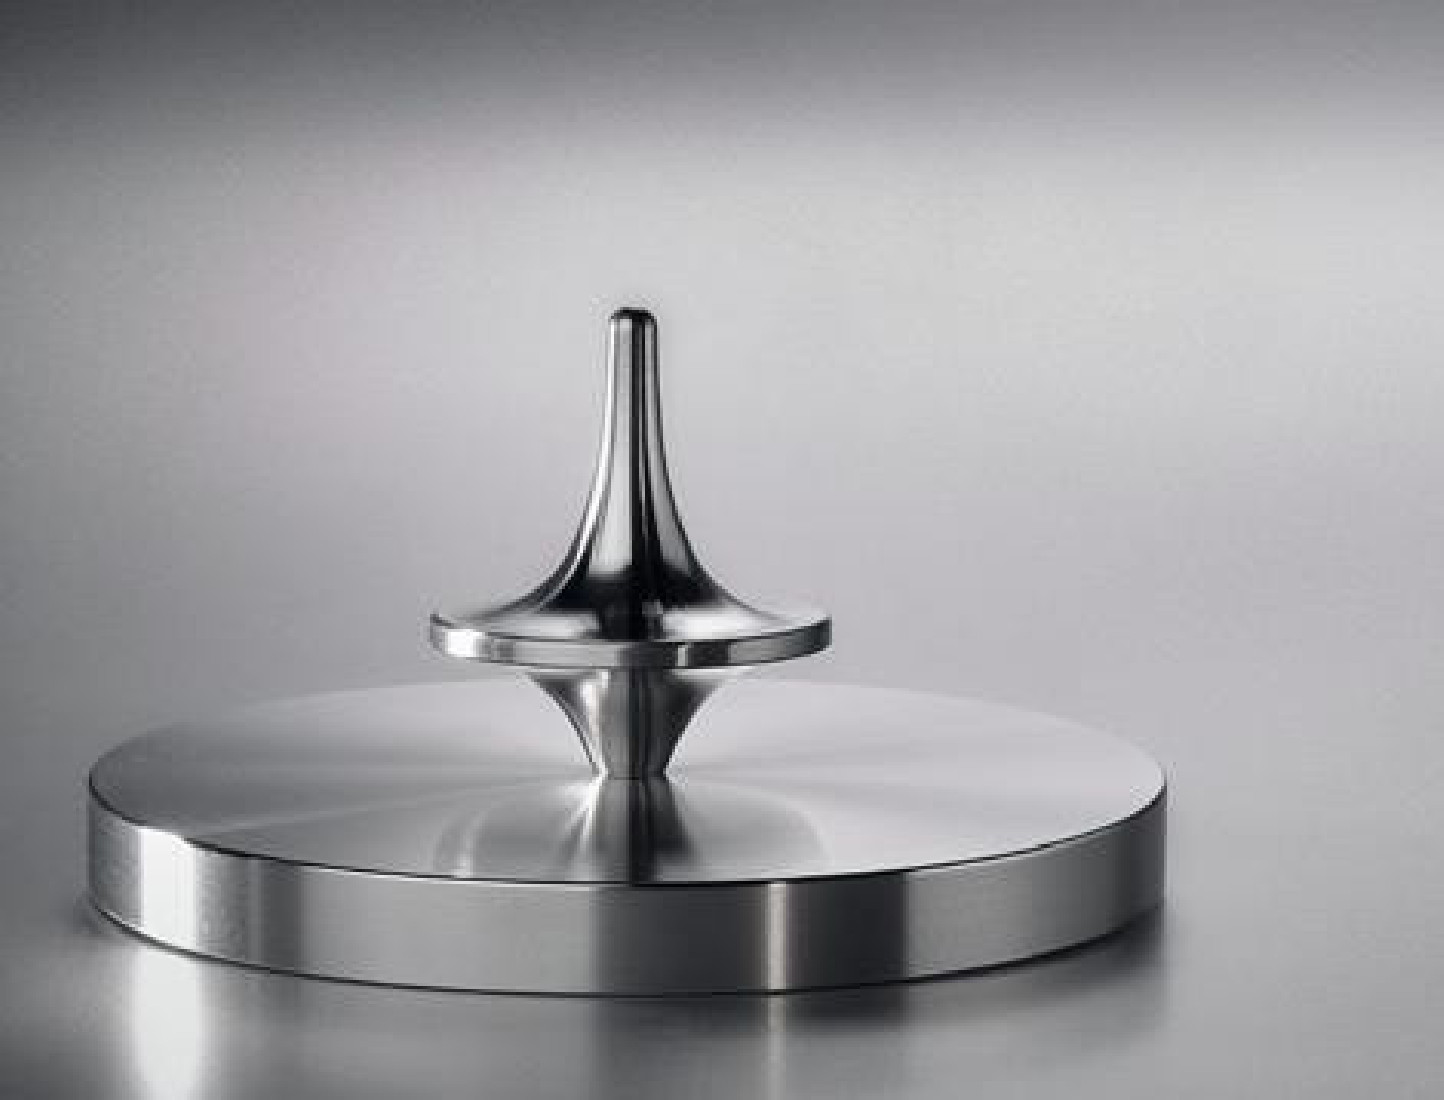 Foreverspin Aluminium (The playful one. Great for upside down spins)